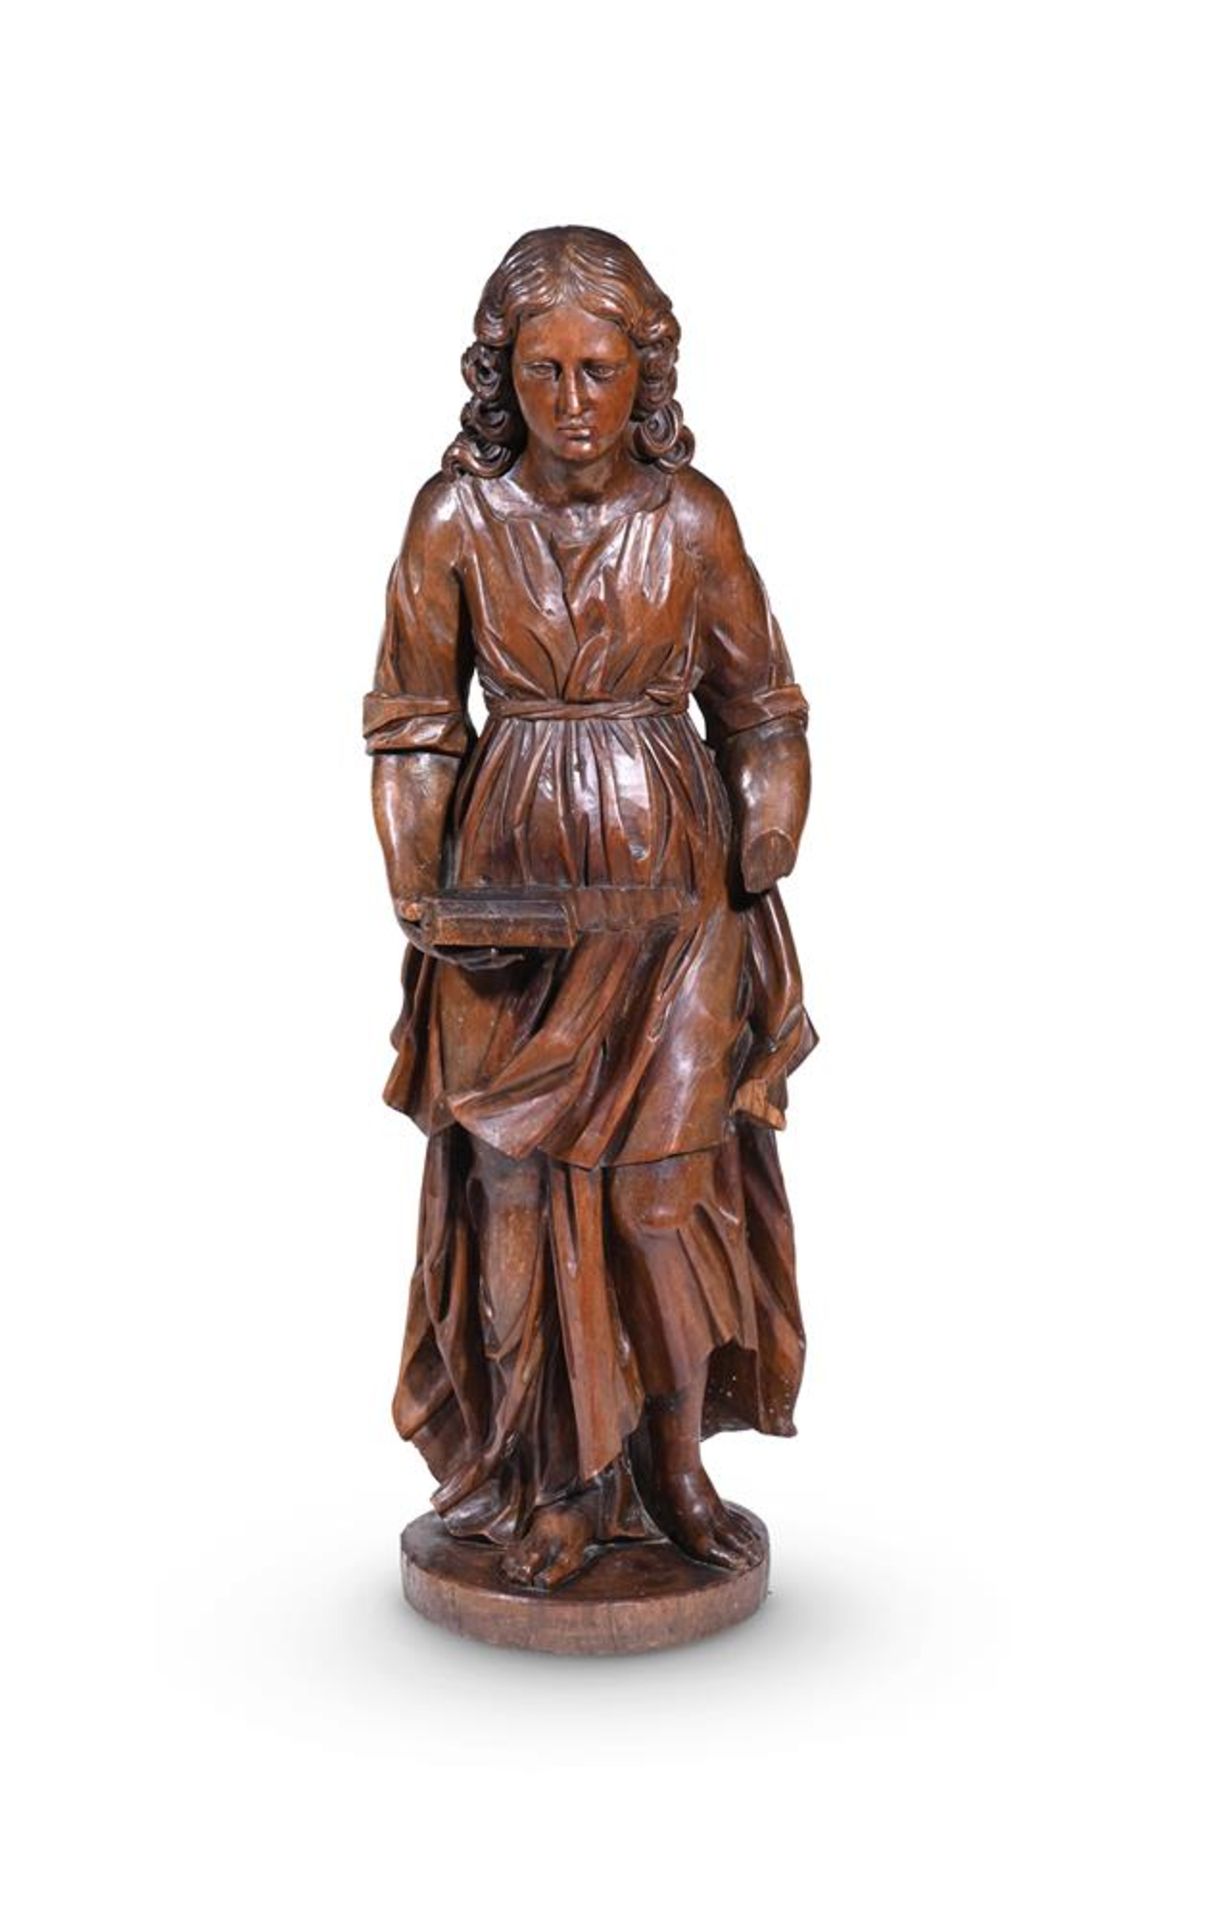 A NORTH EUROPEAN CARVED WALNUT FIGURE OF A WOMAN, LATE 17TH OR EARLY 18TH CENTURY